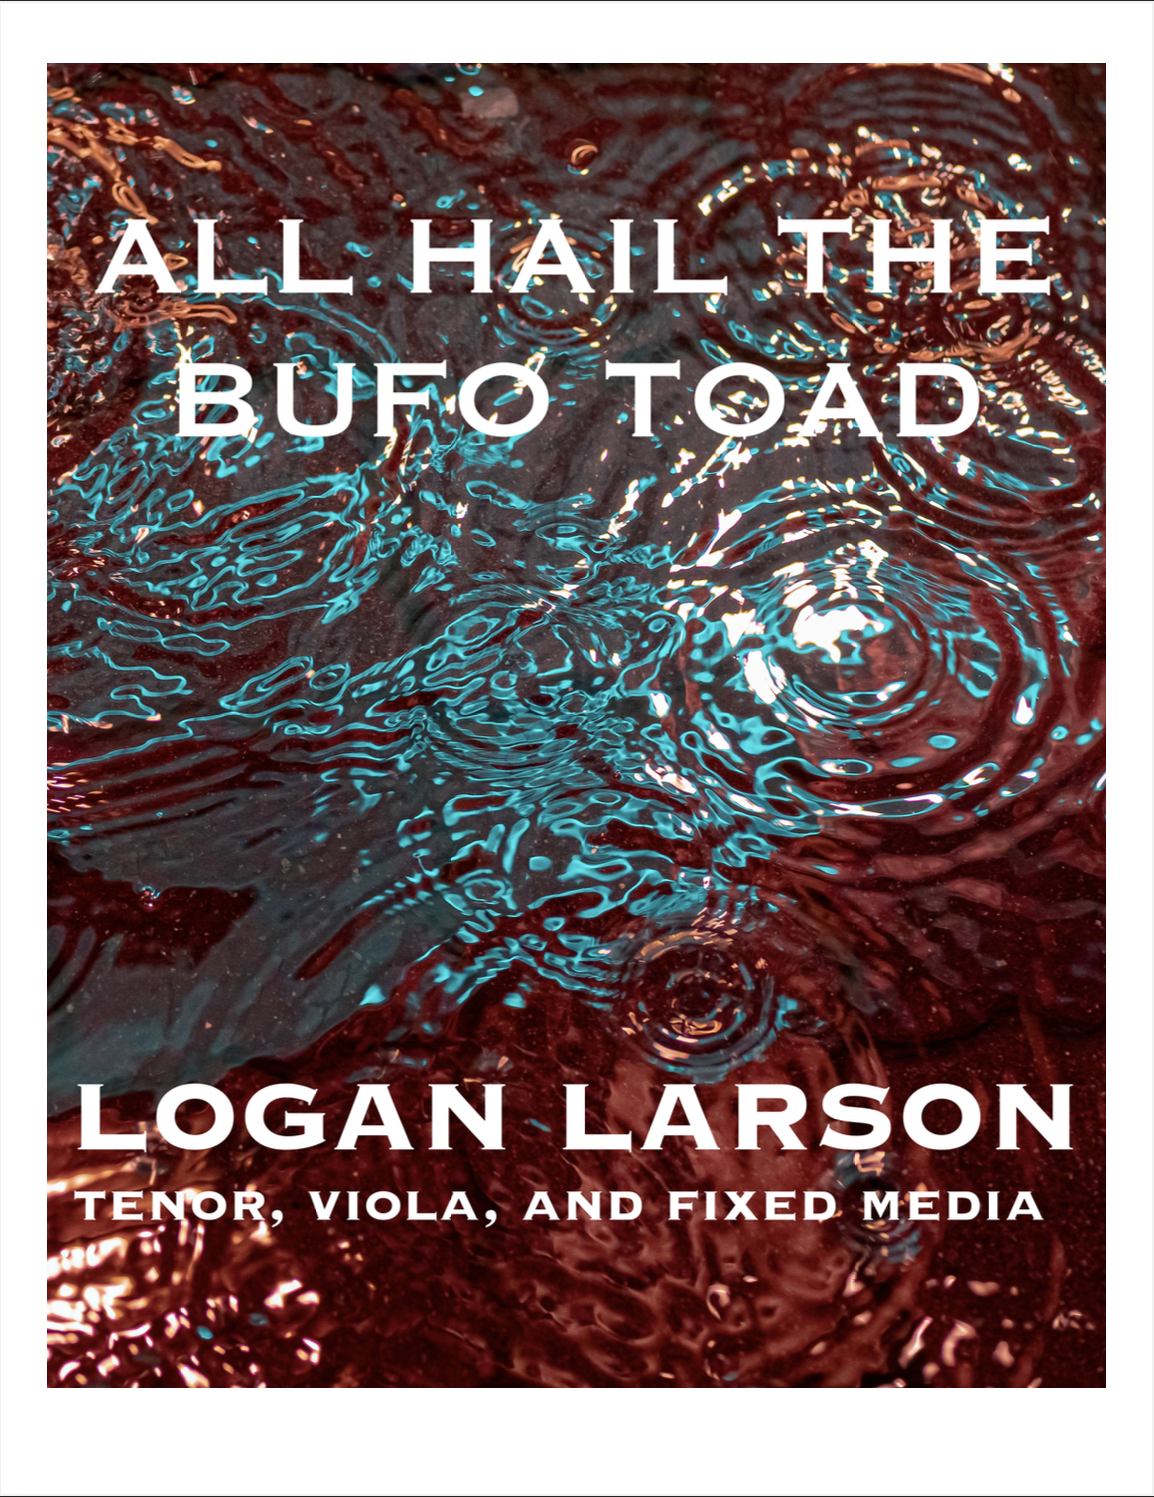 All Hail The Bufo Toad by Logan Larson